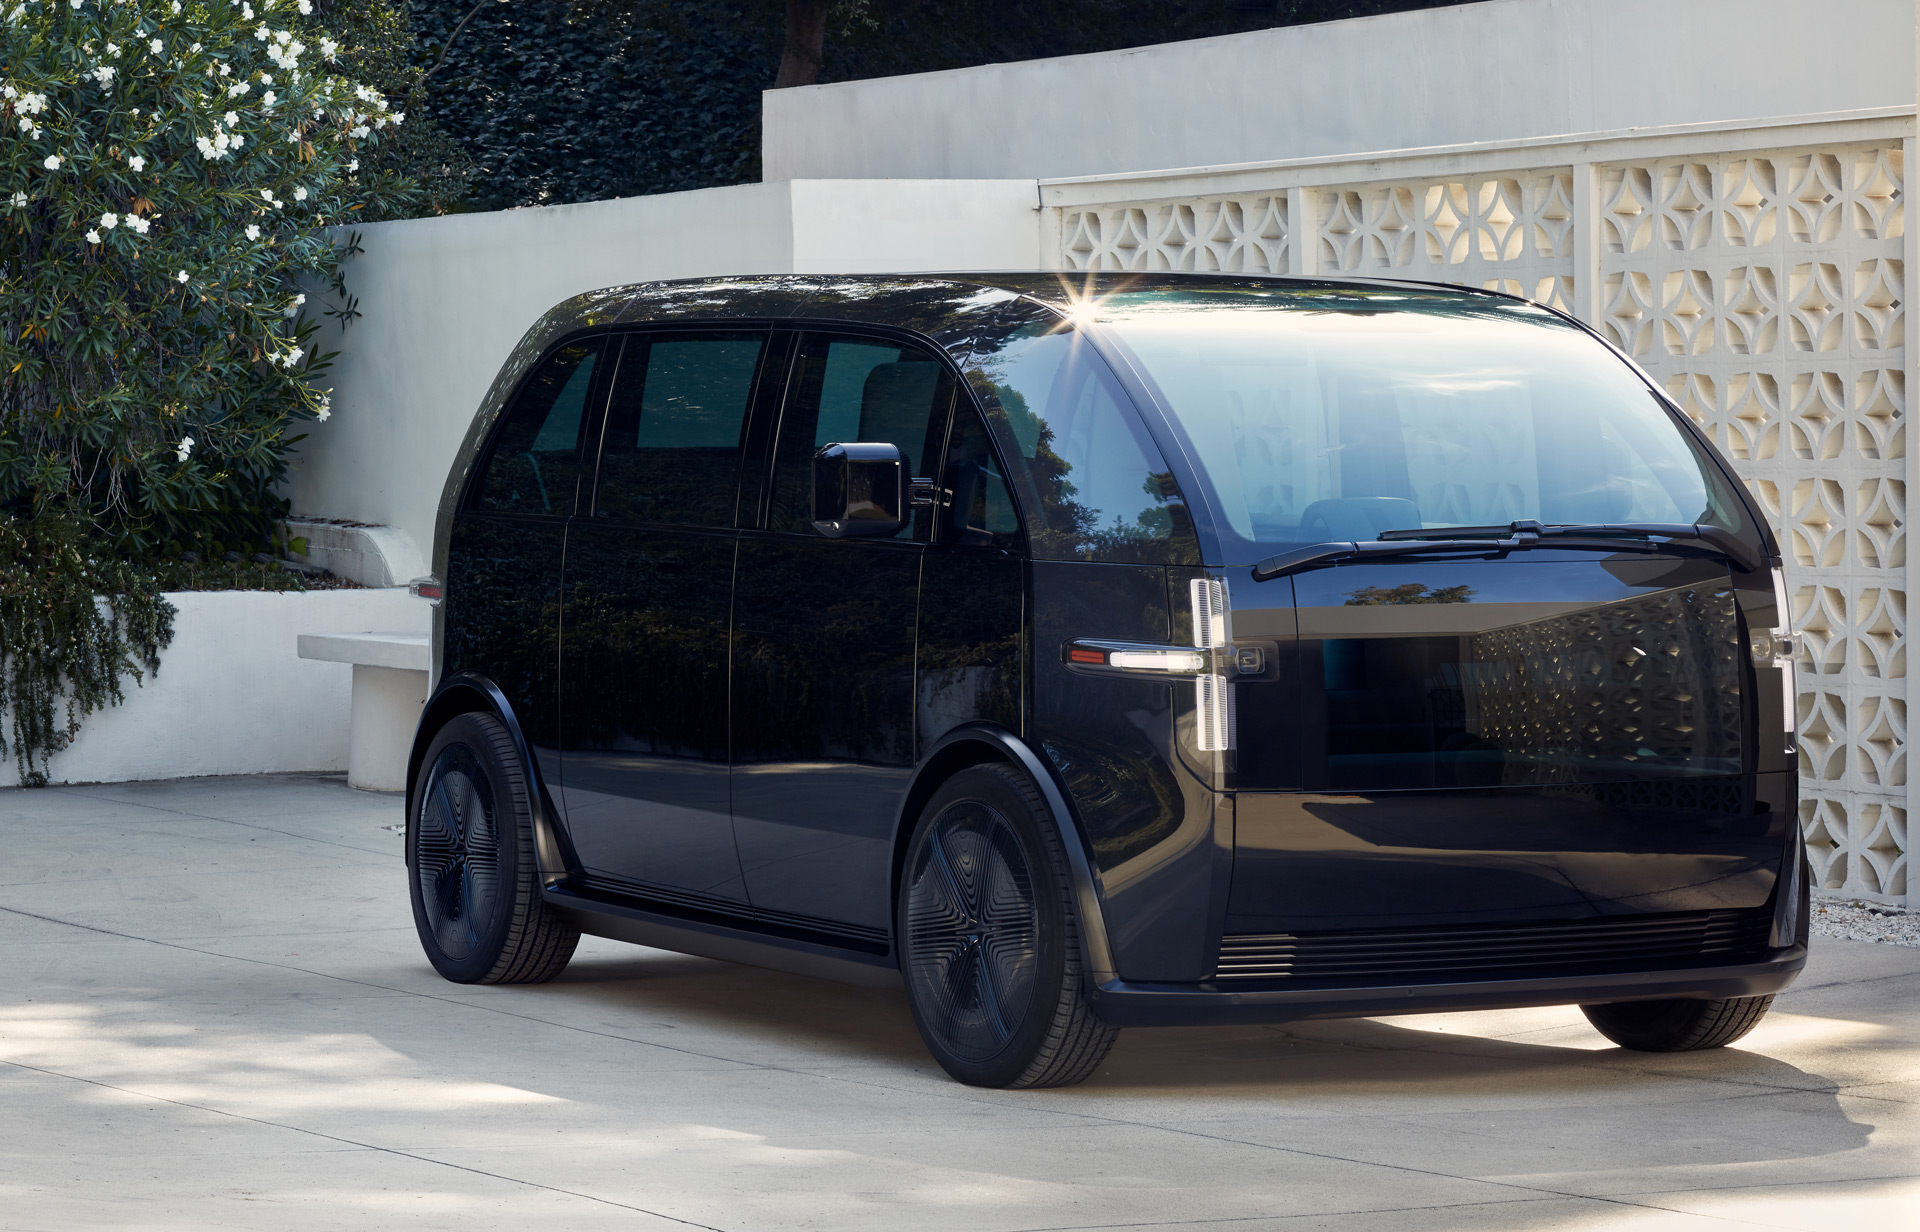 EV startup Canoo's first vehicle is a compact minivan priced from 34,750